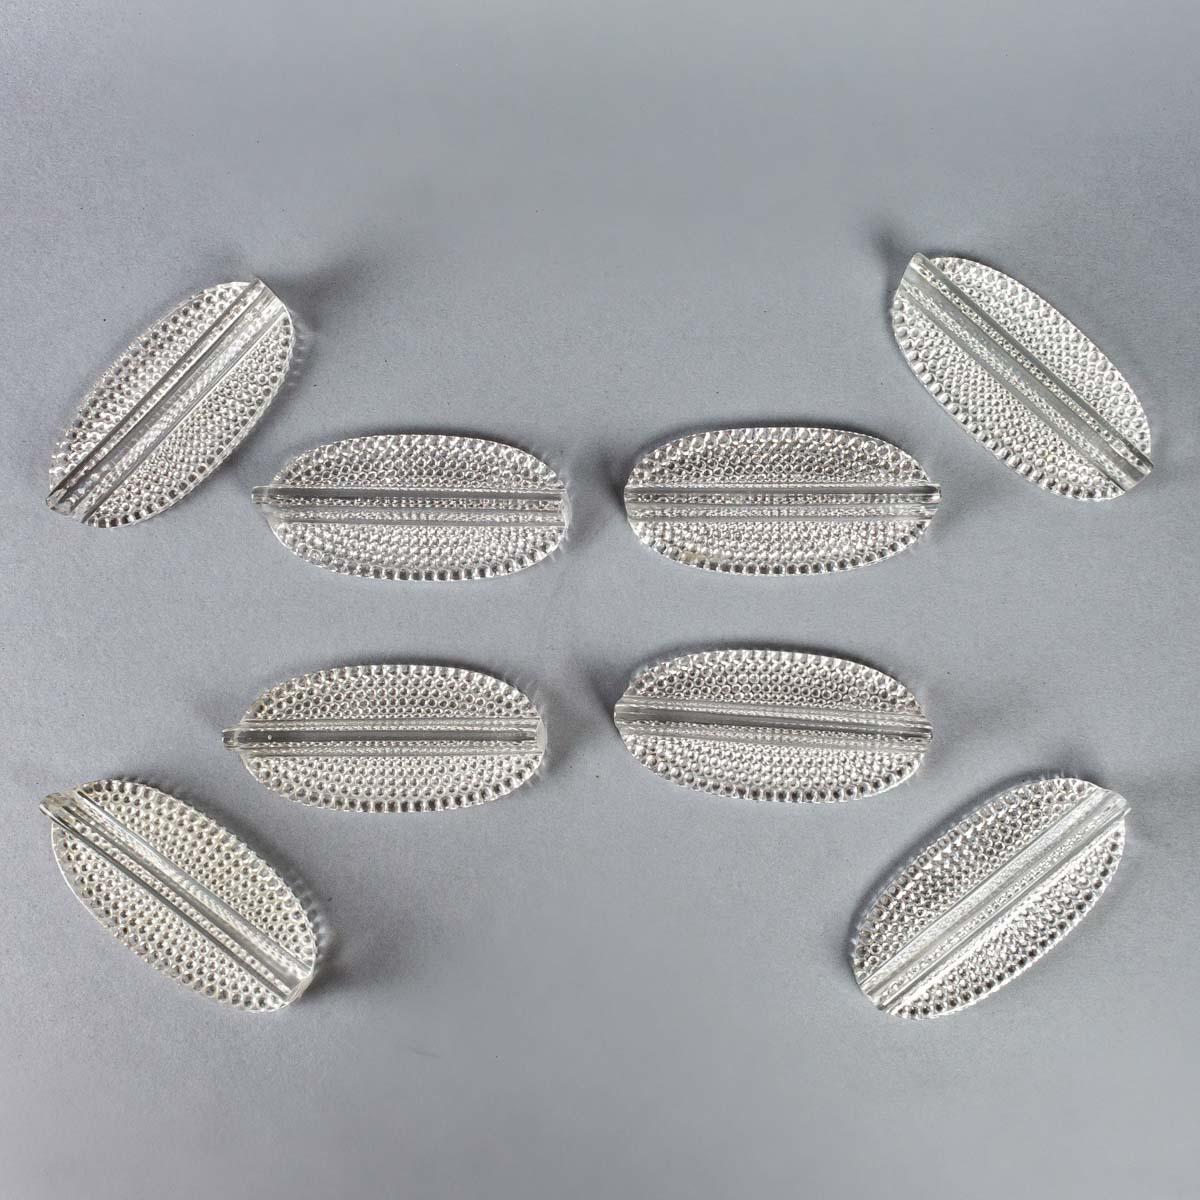 Set of 6 (six) knife rests made in clear glass with sepia stain by René Lalique in 1942. Model is named 